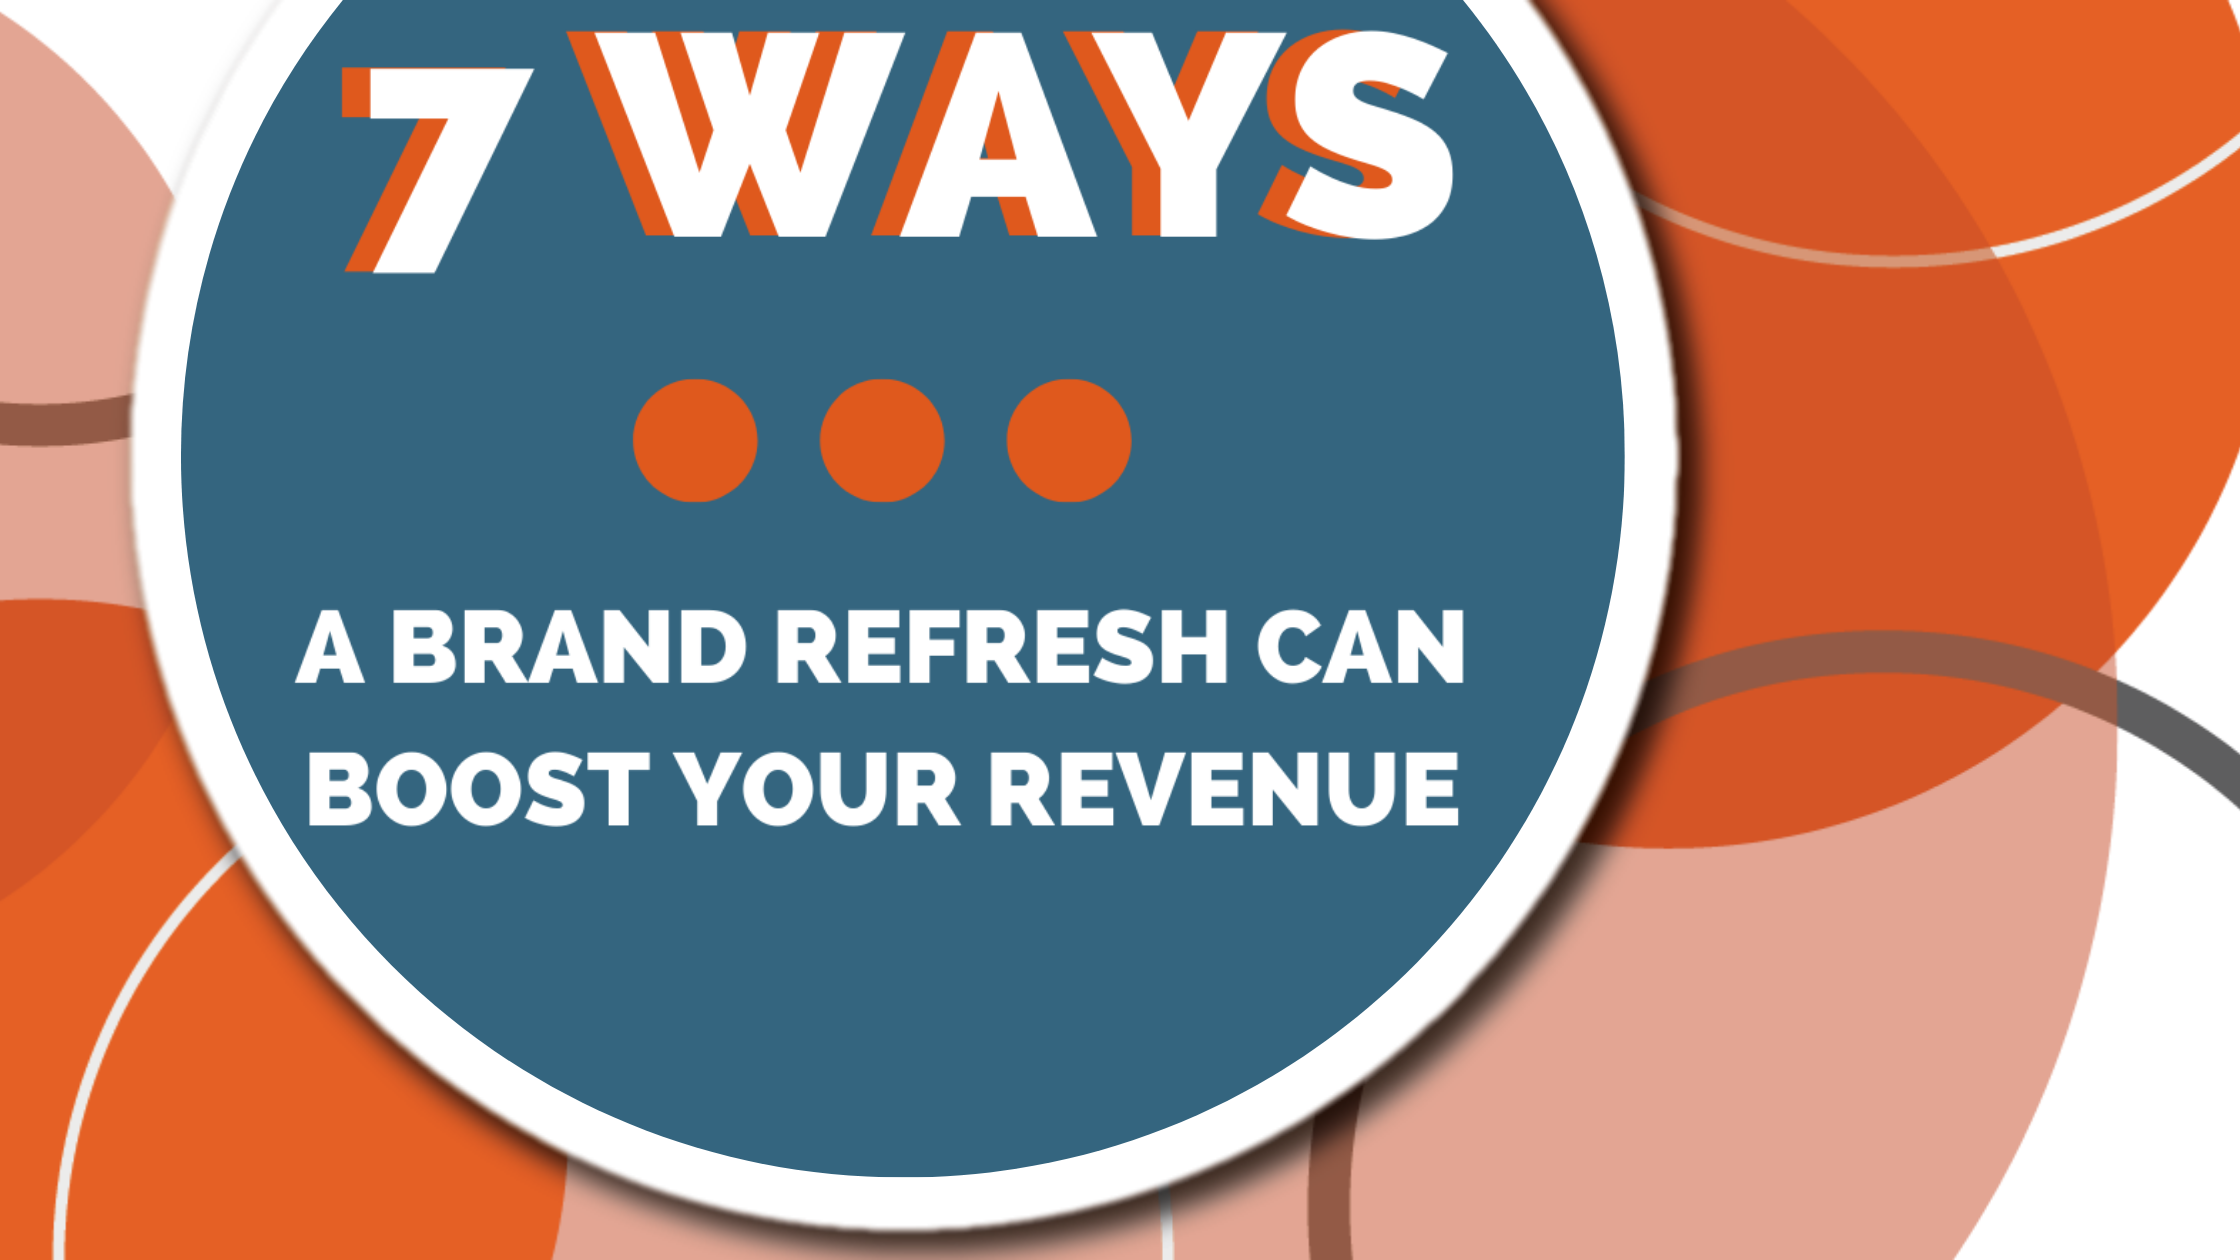 7 Ways a Brand Refresh Can Boost revenue